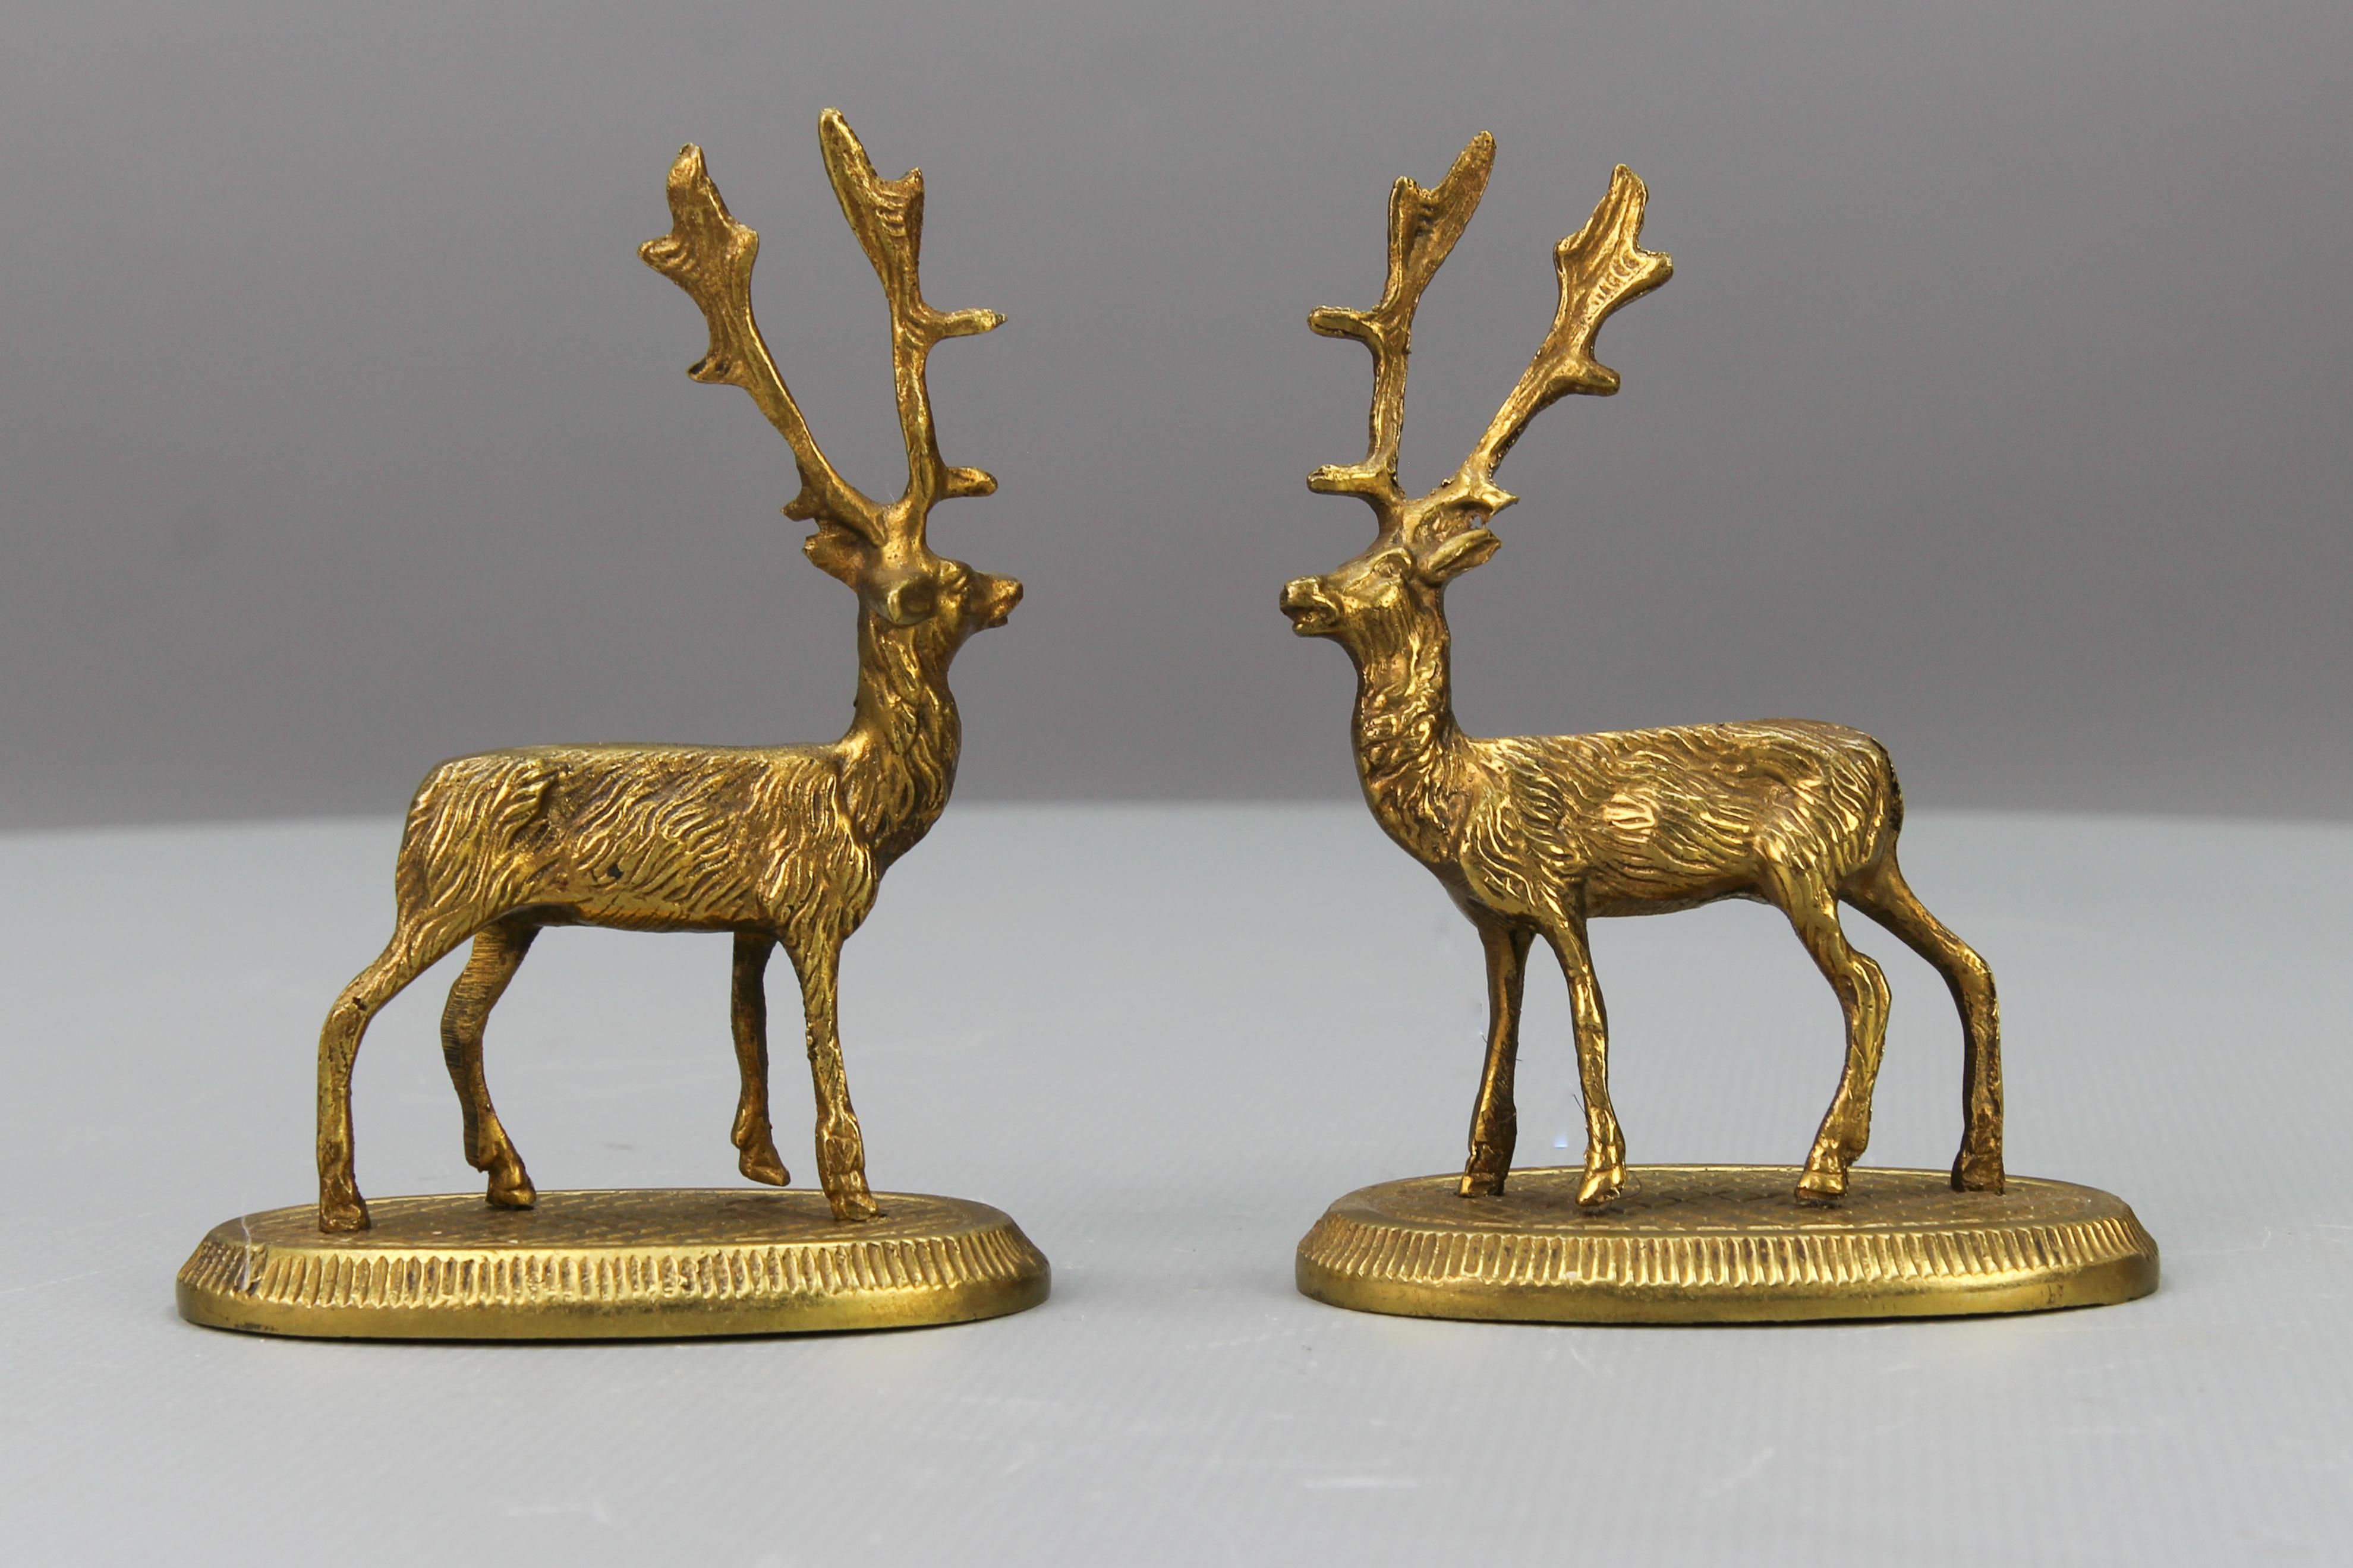 Small bronze deer figurines, set of two, date back to the 1950s. These are a pair of small deer figurines mounted on oval pedestals. 
The sculptures are in good condition, with slight signs of aging. 
Their dimensions are as follows: height: 11 cm /